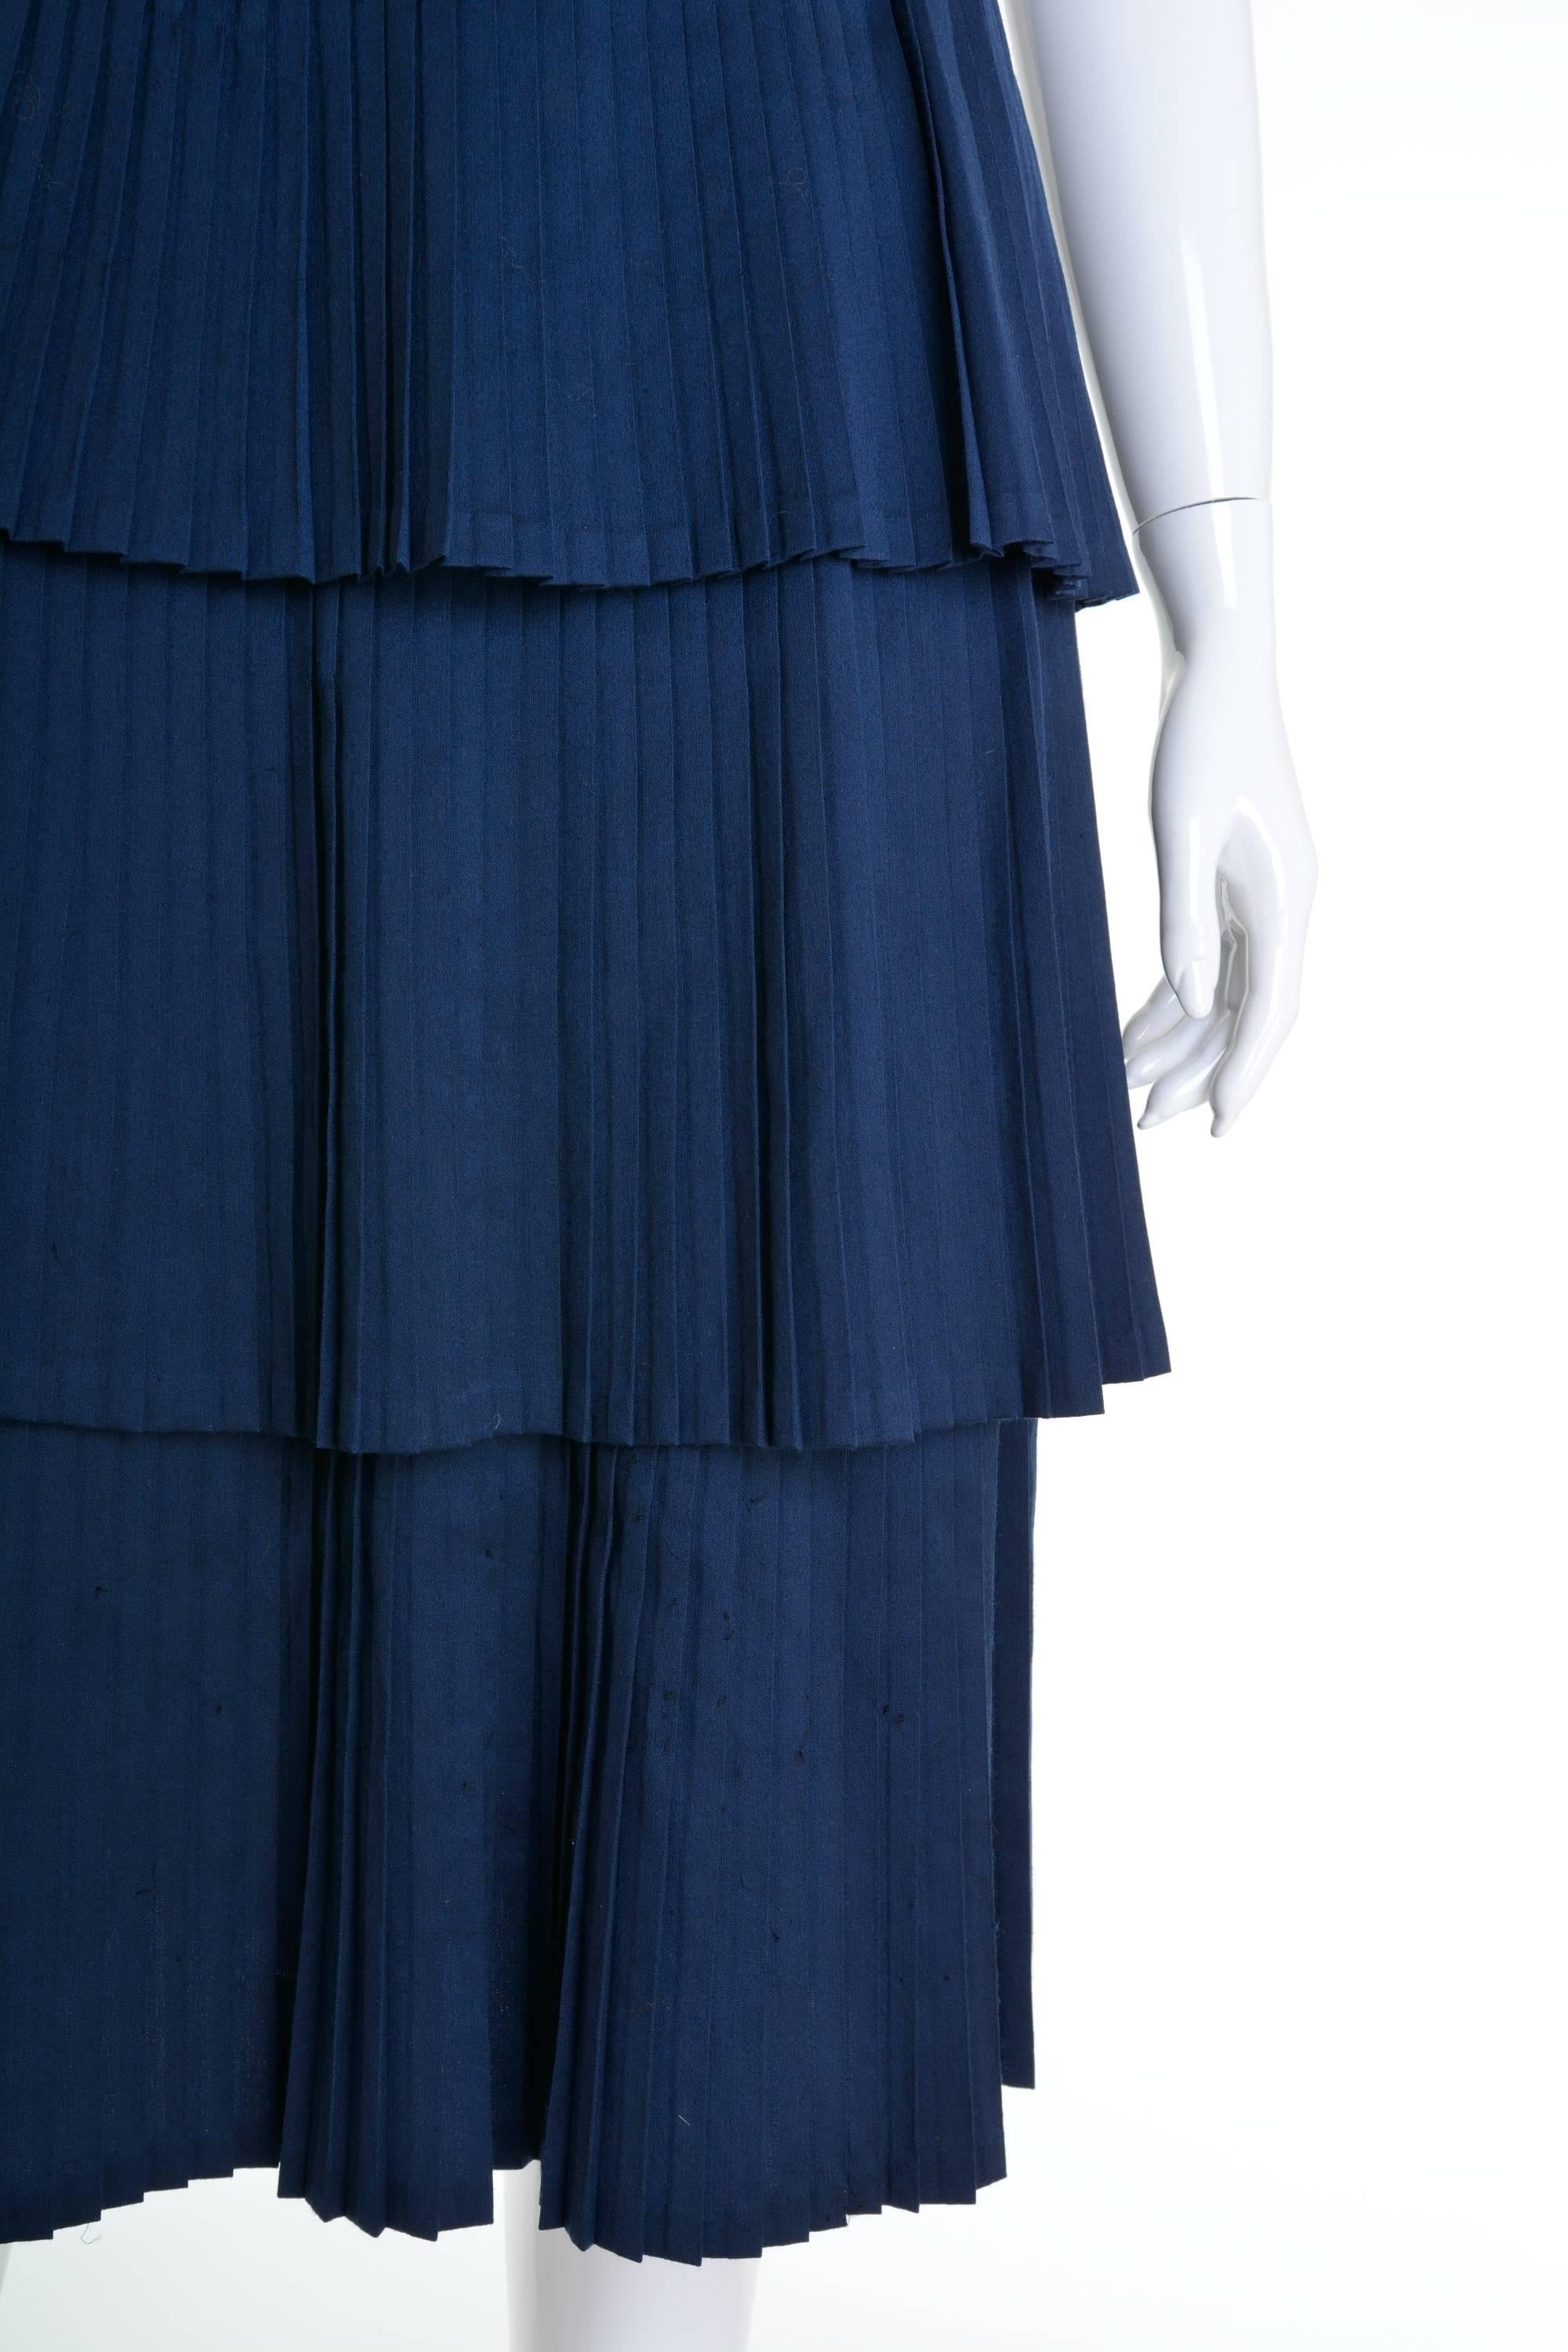 1950s Blue Flounced Pleateds Cocktail Dress In Good Condition For Sale In Milan, Italy